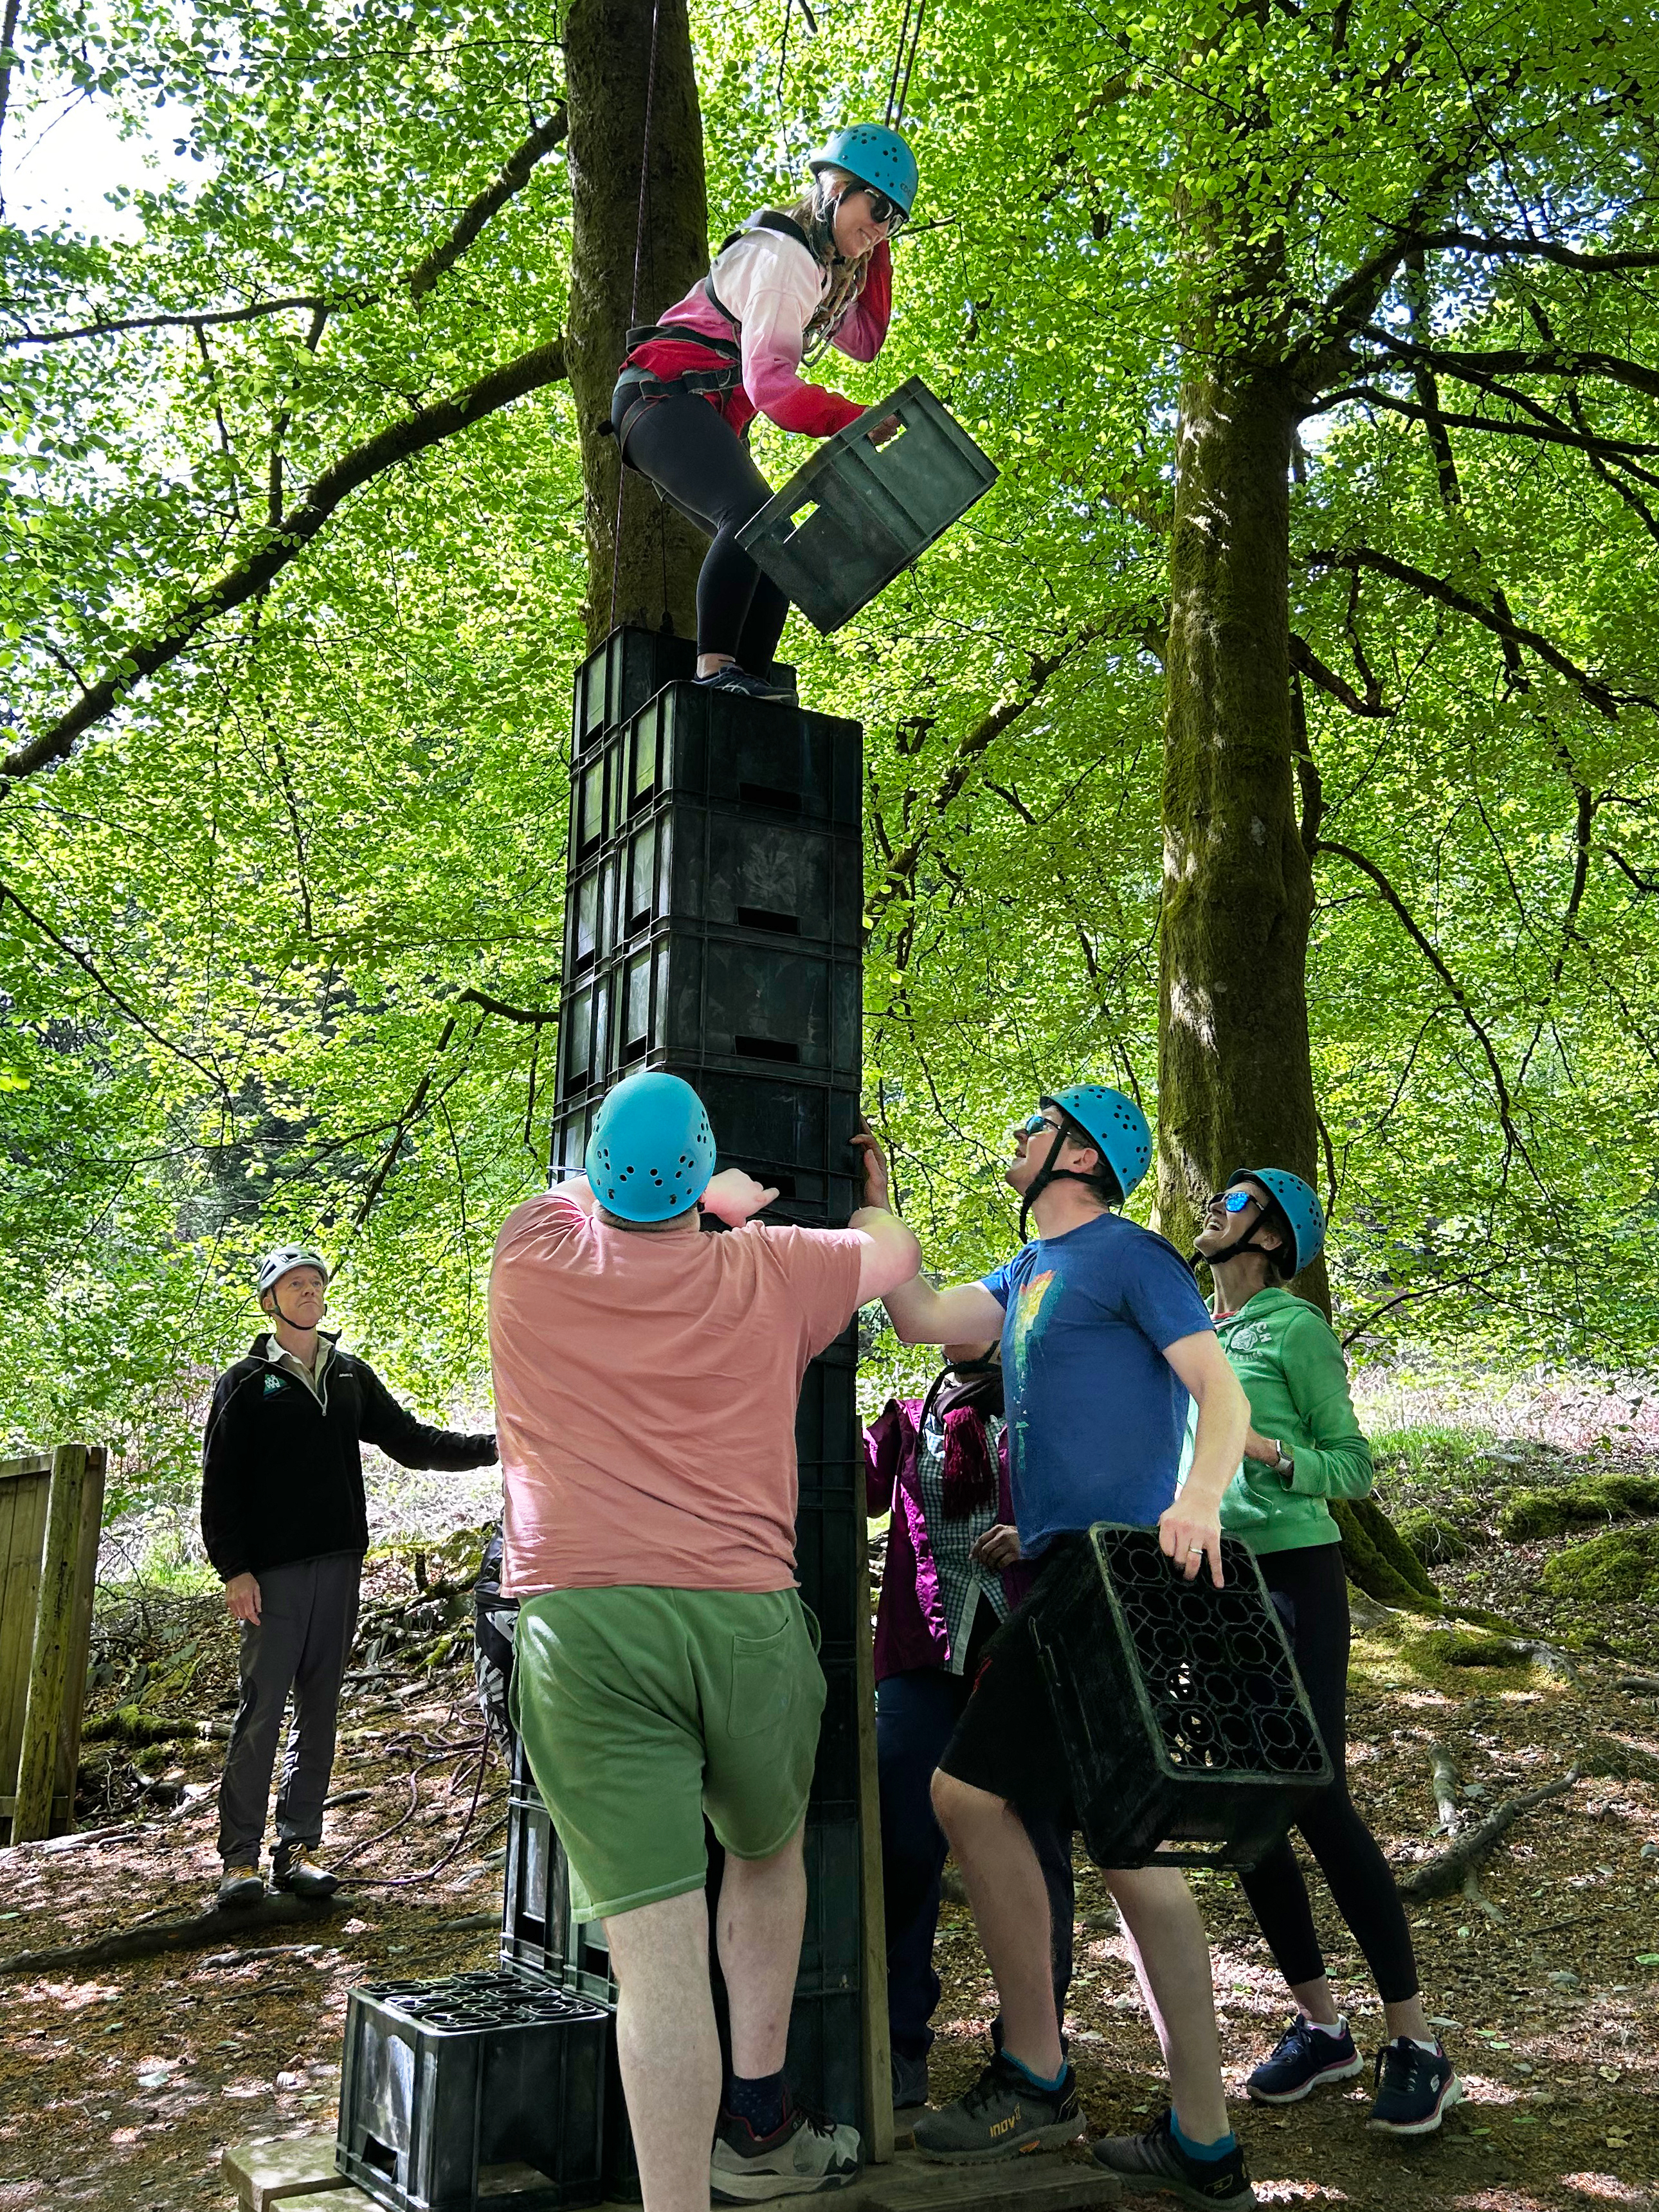 Team of people working together to build a tower of crates in a forest